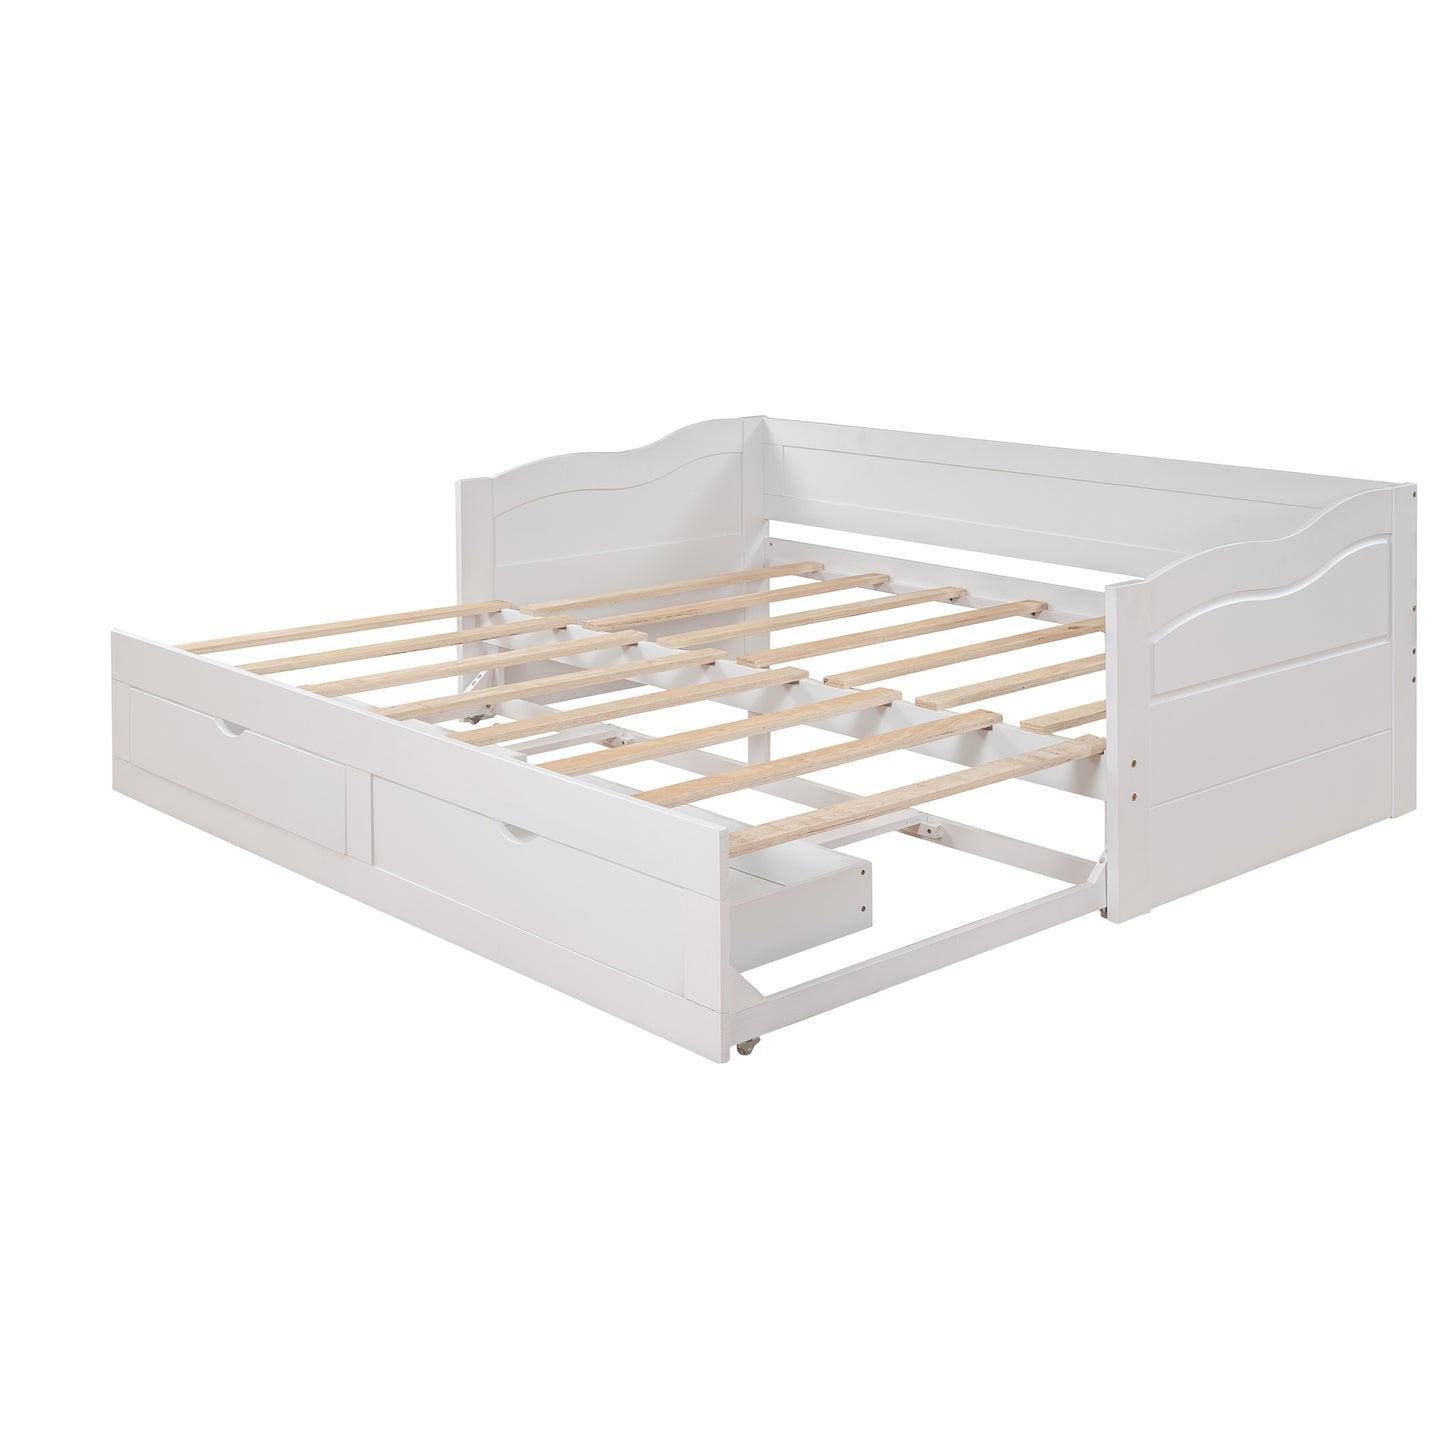 Wooden Daybed with Trundle Bed and Two Storage Drawers , Extendable Bed Daybed,Sofa Bed with Two Drawers, White